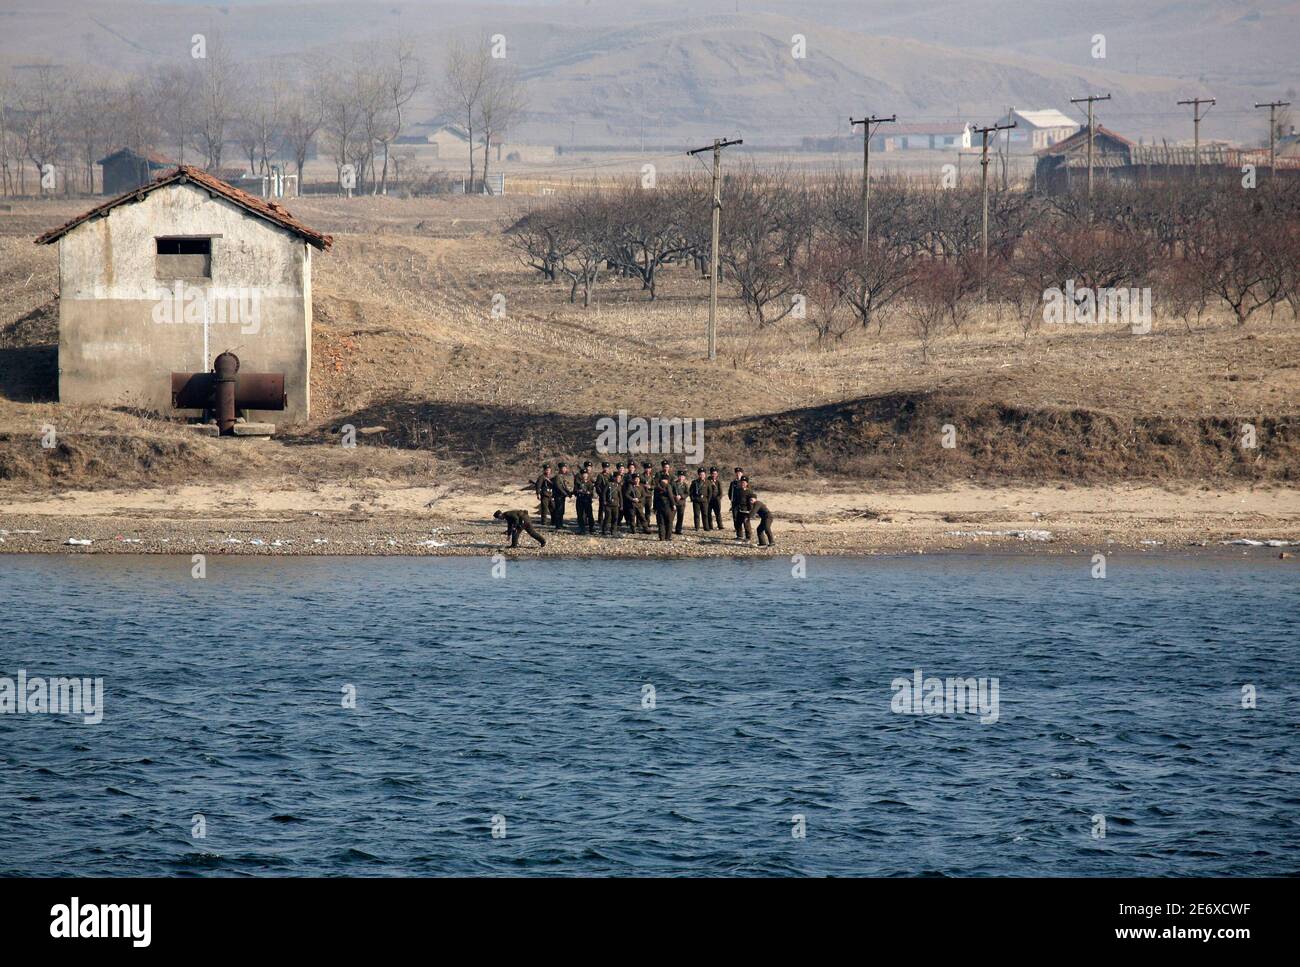 North Korean soldiers play with stones while guarding the banks of Yalu River near the North Korean town of Sinuiju, opposite the Chinese border city of Dandong, March 10, 2010. China has acquired a 10-year lease of Rajin port on North Korea's east coast, potentially increasing shipping access to the Sea of Japan, a provincial official said during China's annual legislative meeting. REUTERS/Jacky Chen (NORTH KOREA - Tags: MILITARY BUSINESS POLITICS) Foto Stock